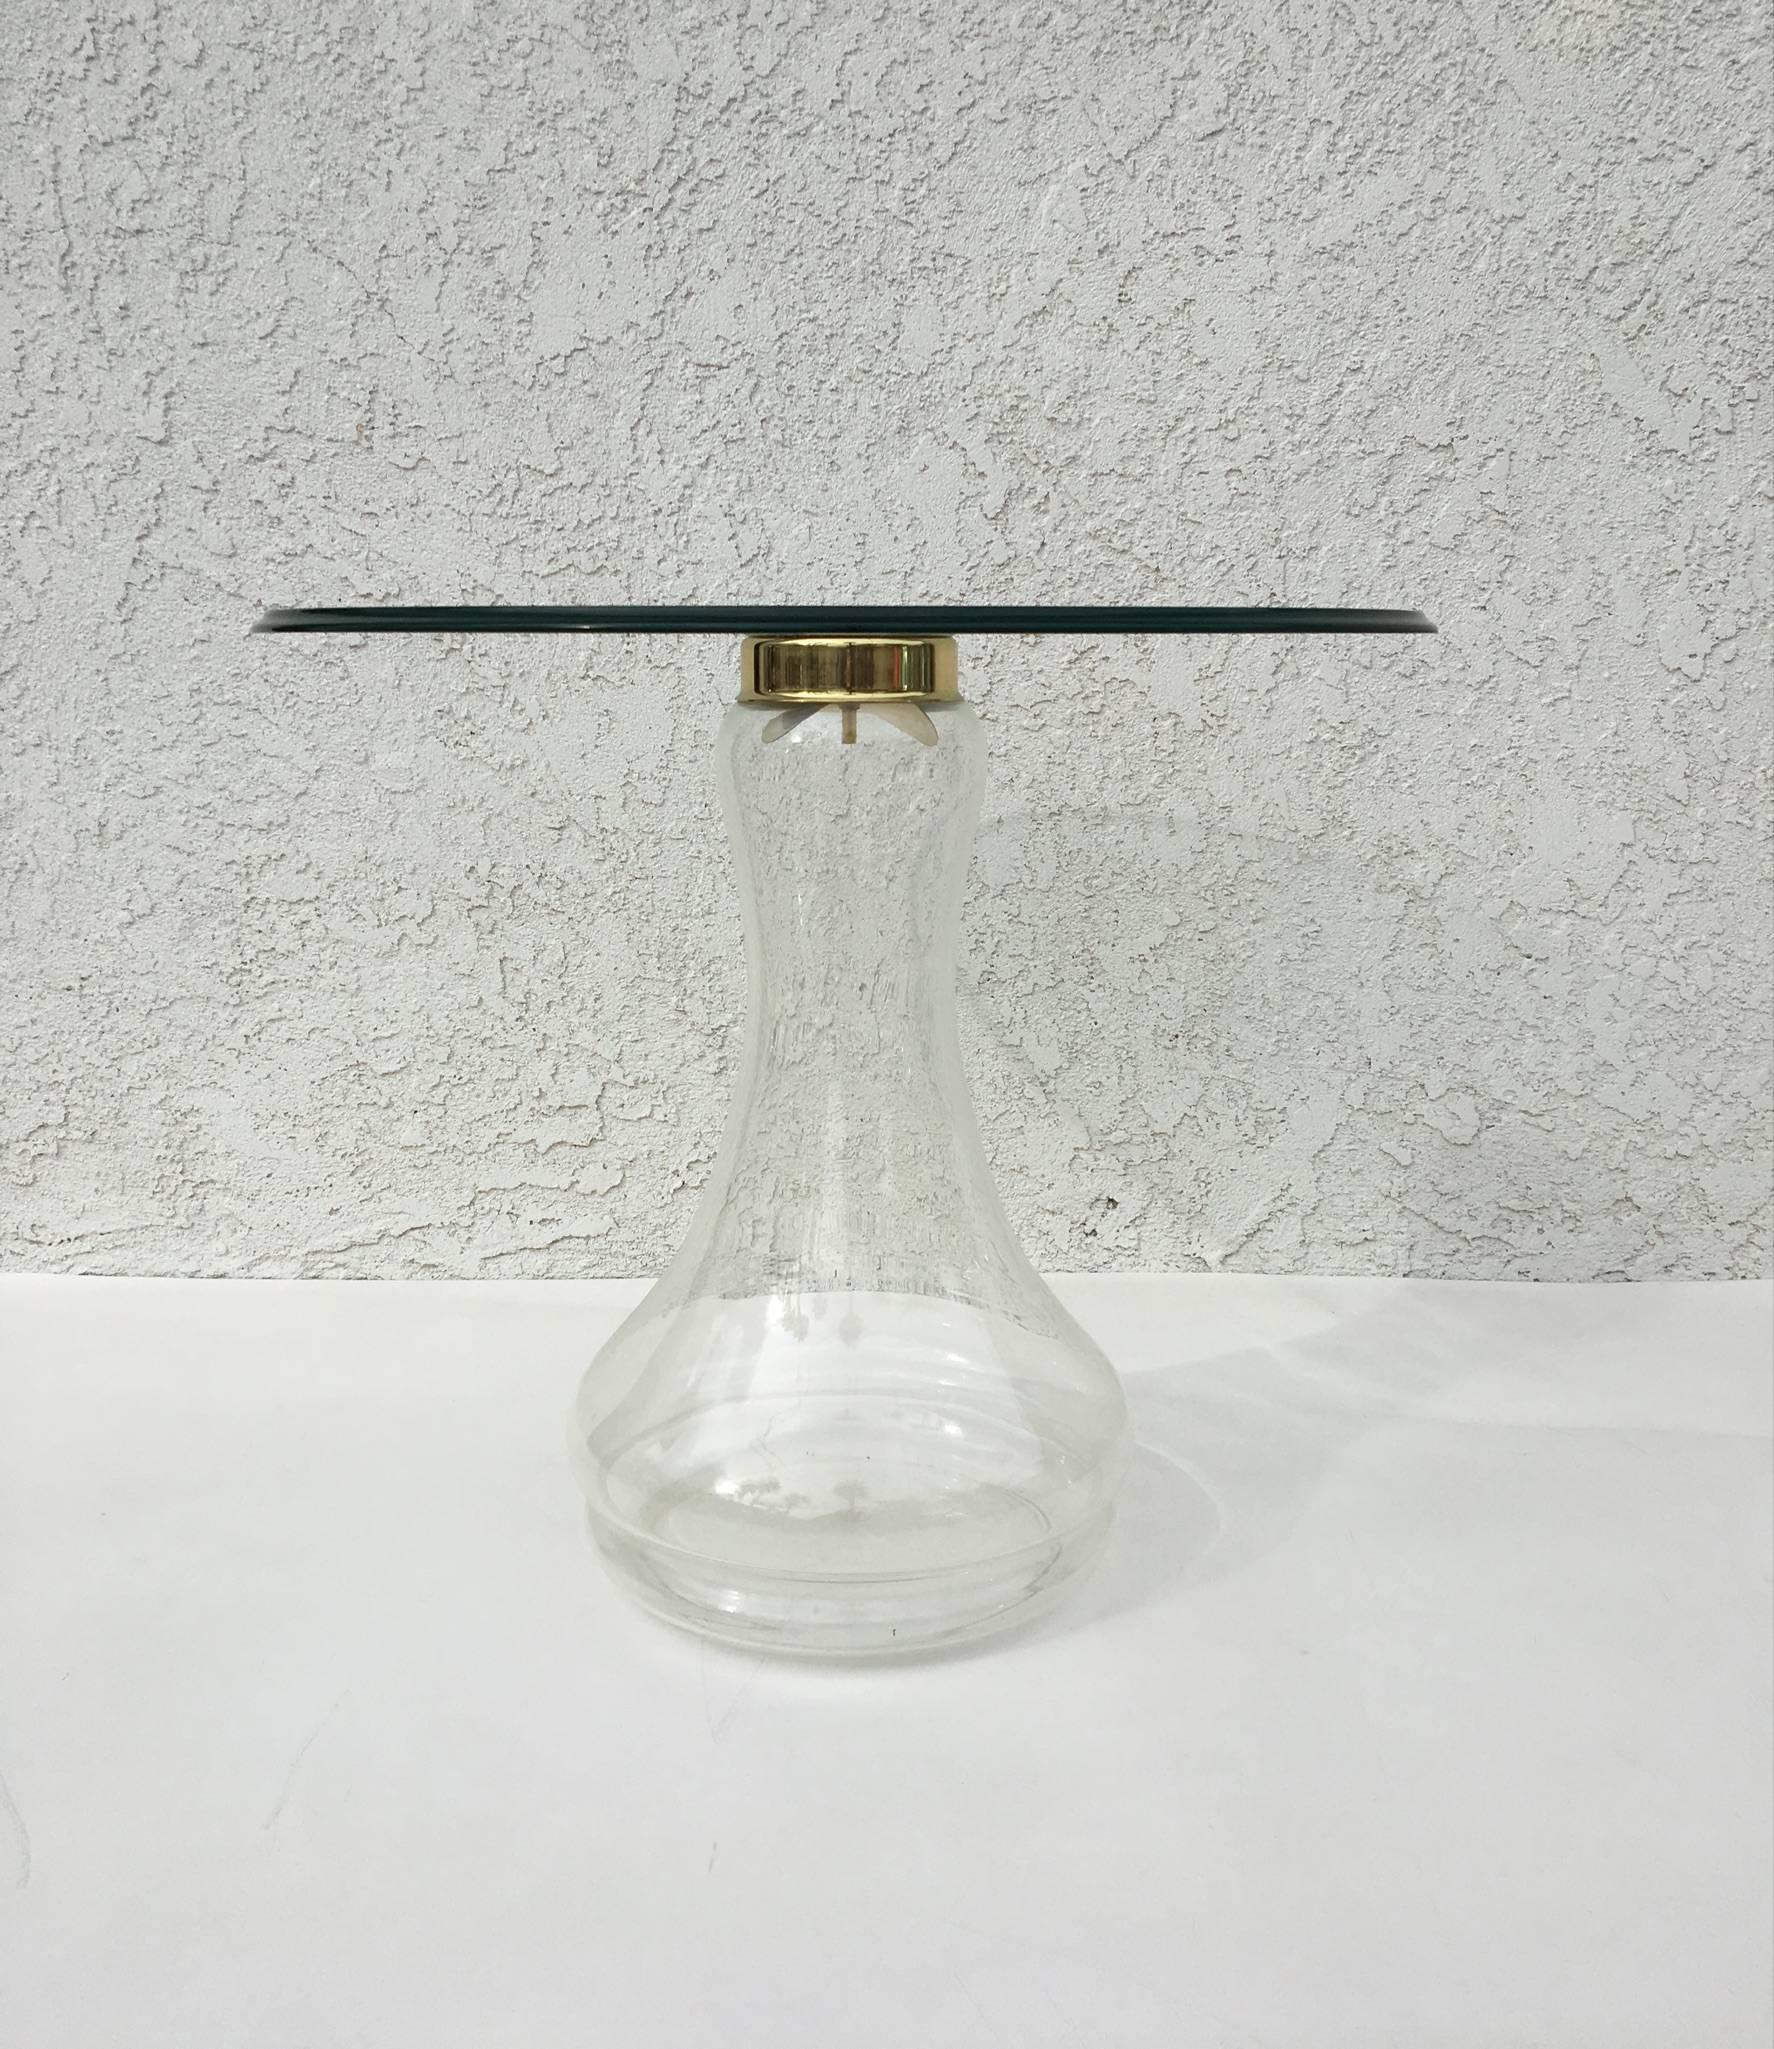 A glass and brass side table by Sarreid Ltd. Spain
The base is handblown and retaining the Sarreid Ltd. label.
The glass top is 1/2